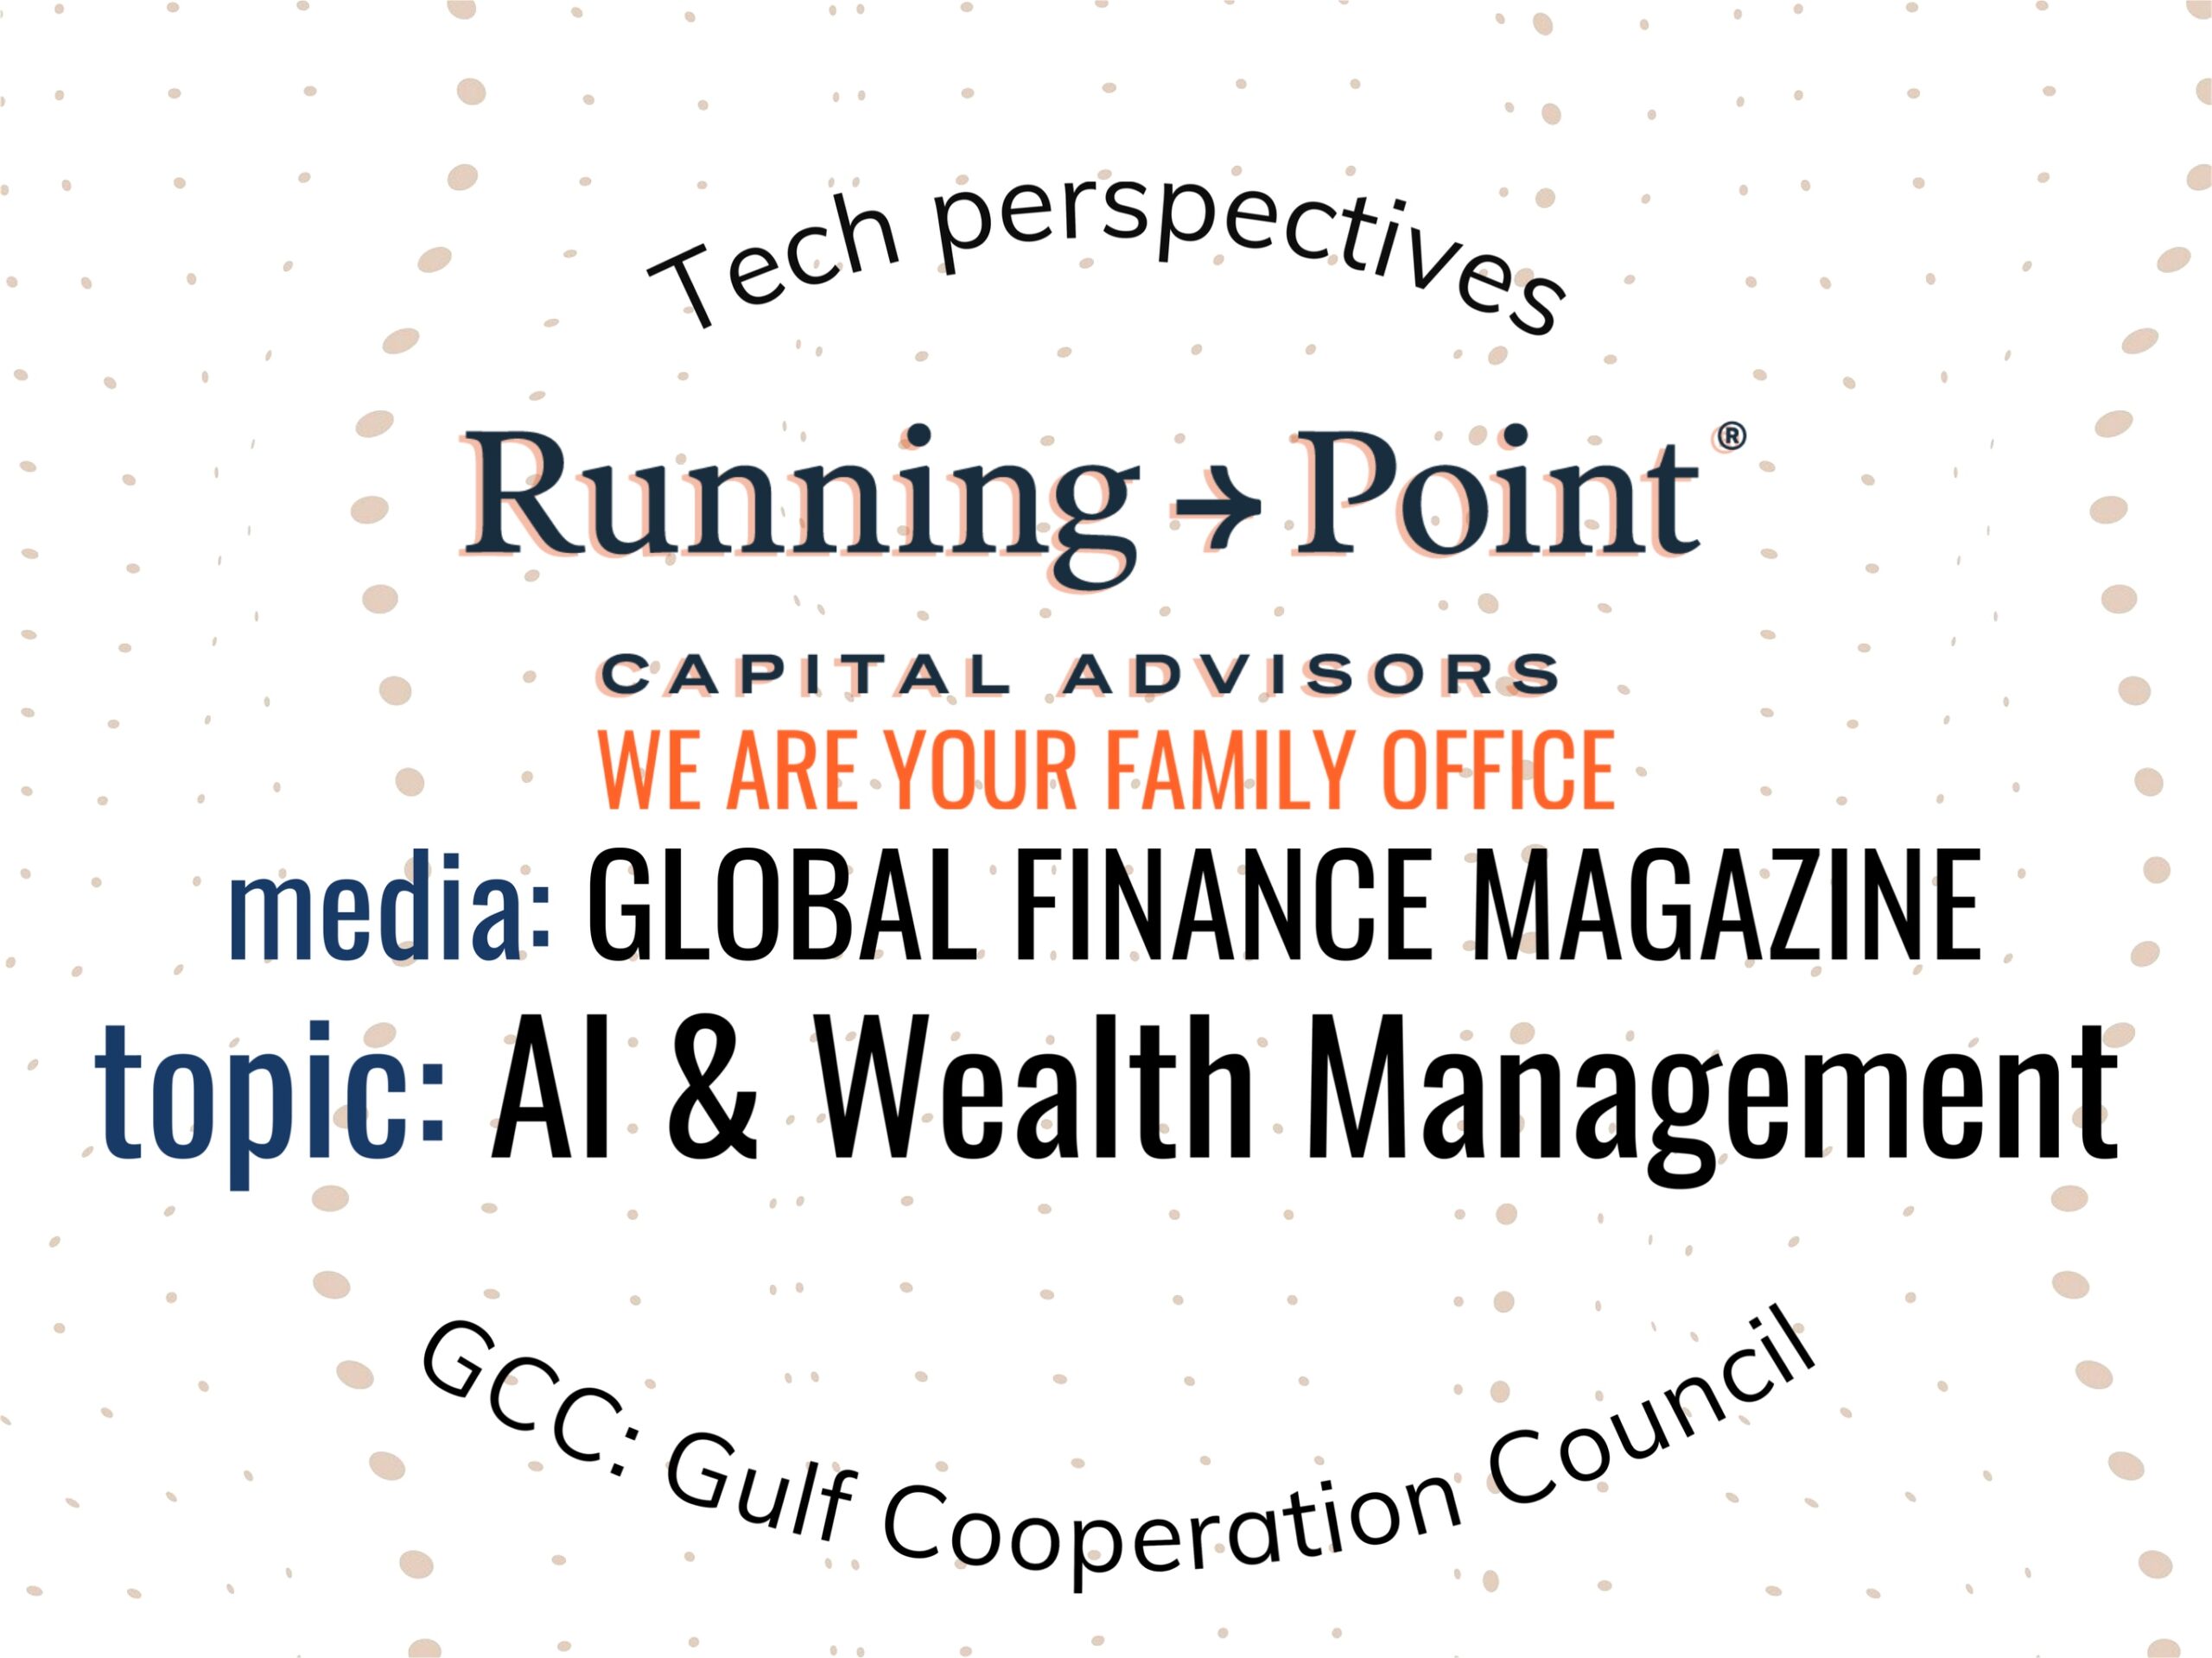 Global Finance Magazine: Wealth Management in the Middle East